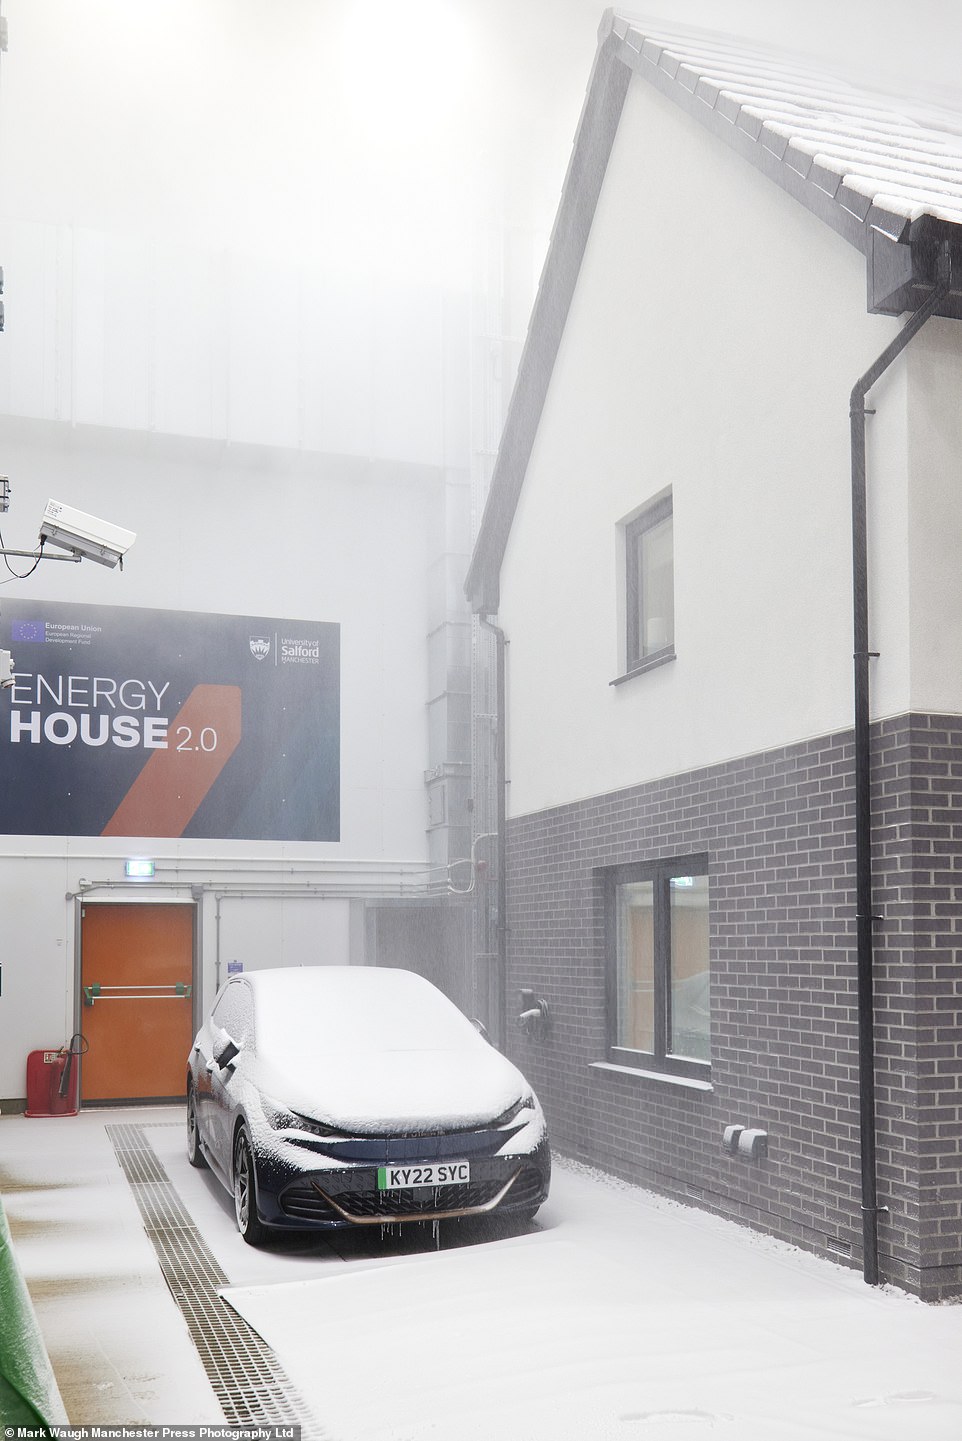 Upon arrival, the chamber, which can fit up to 24 double-decker buses, was set to a cool 23°F (-5°C). But with the click of a button, scientists in the control room had forced the temperature down to 3.2°F (-16°C), with snow blasting out of a machine onto a house